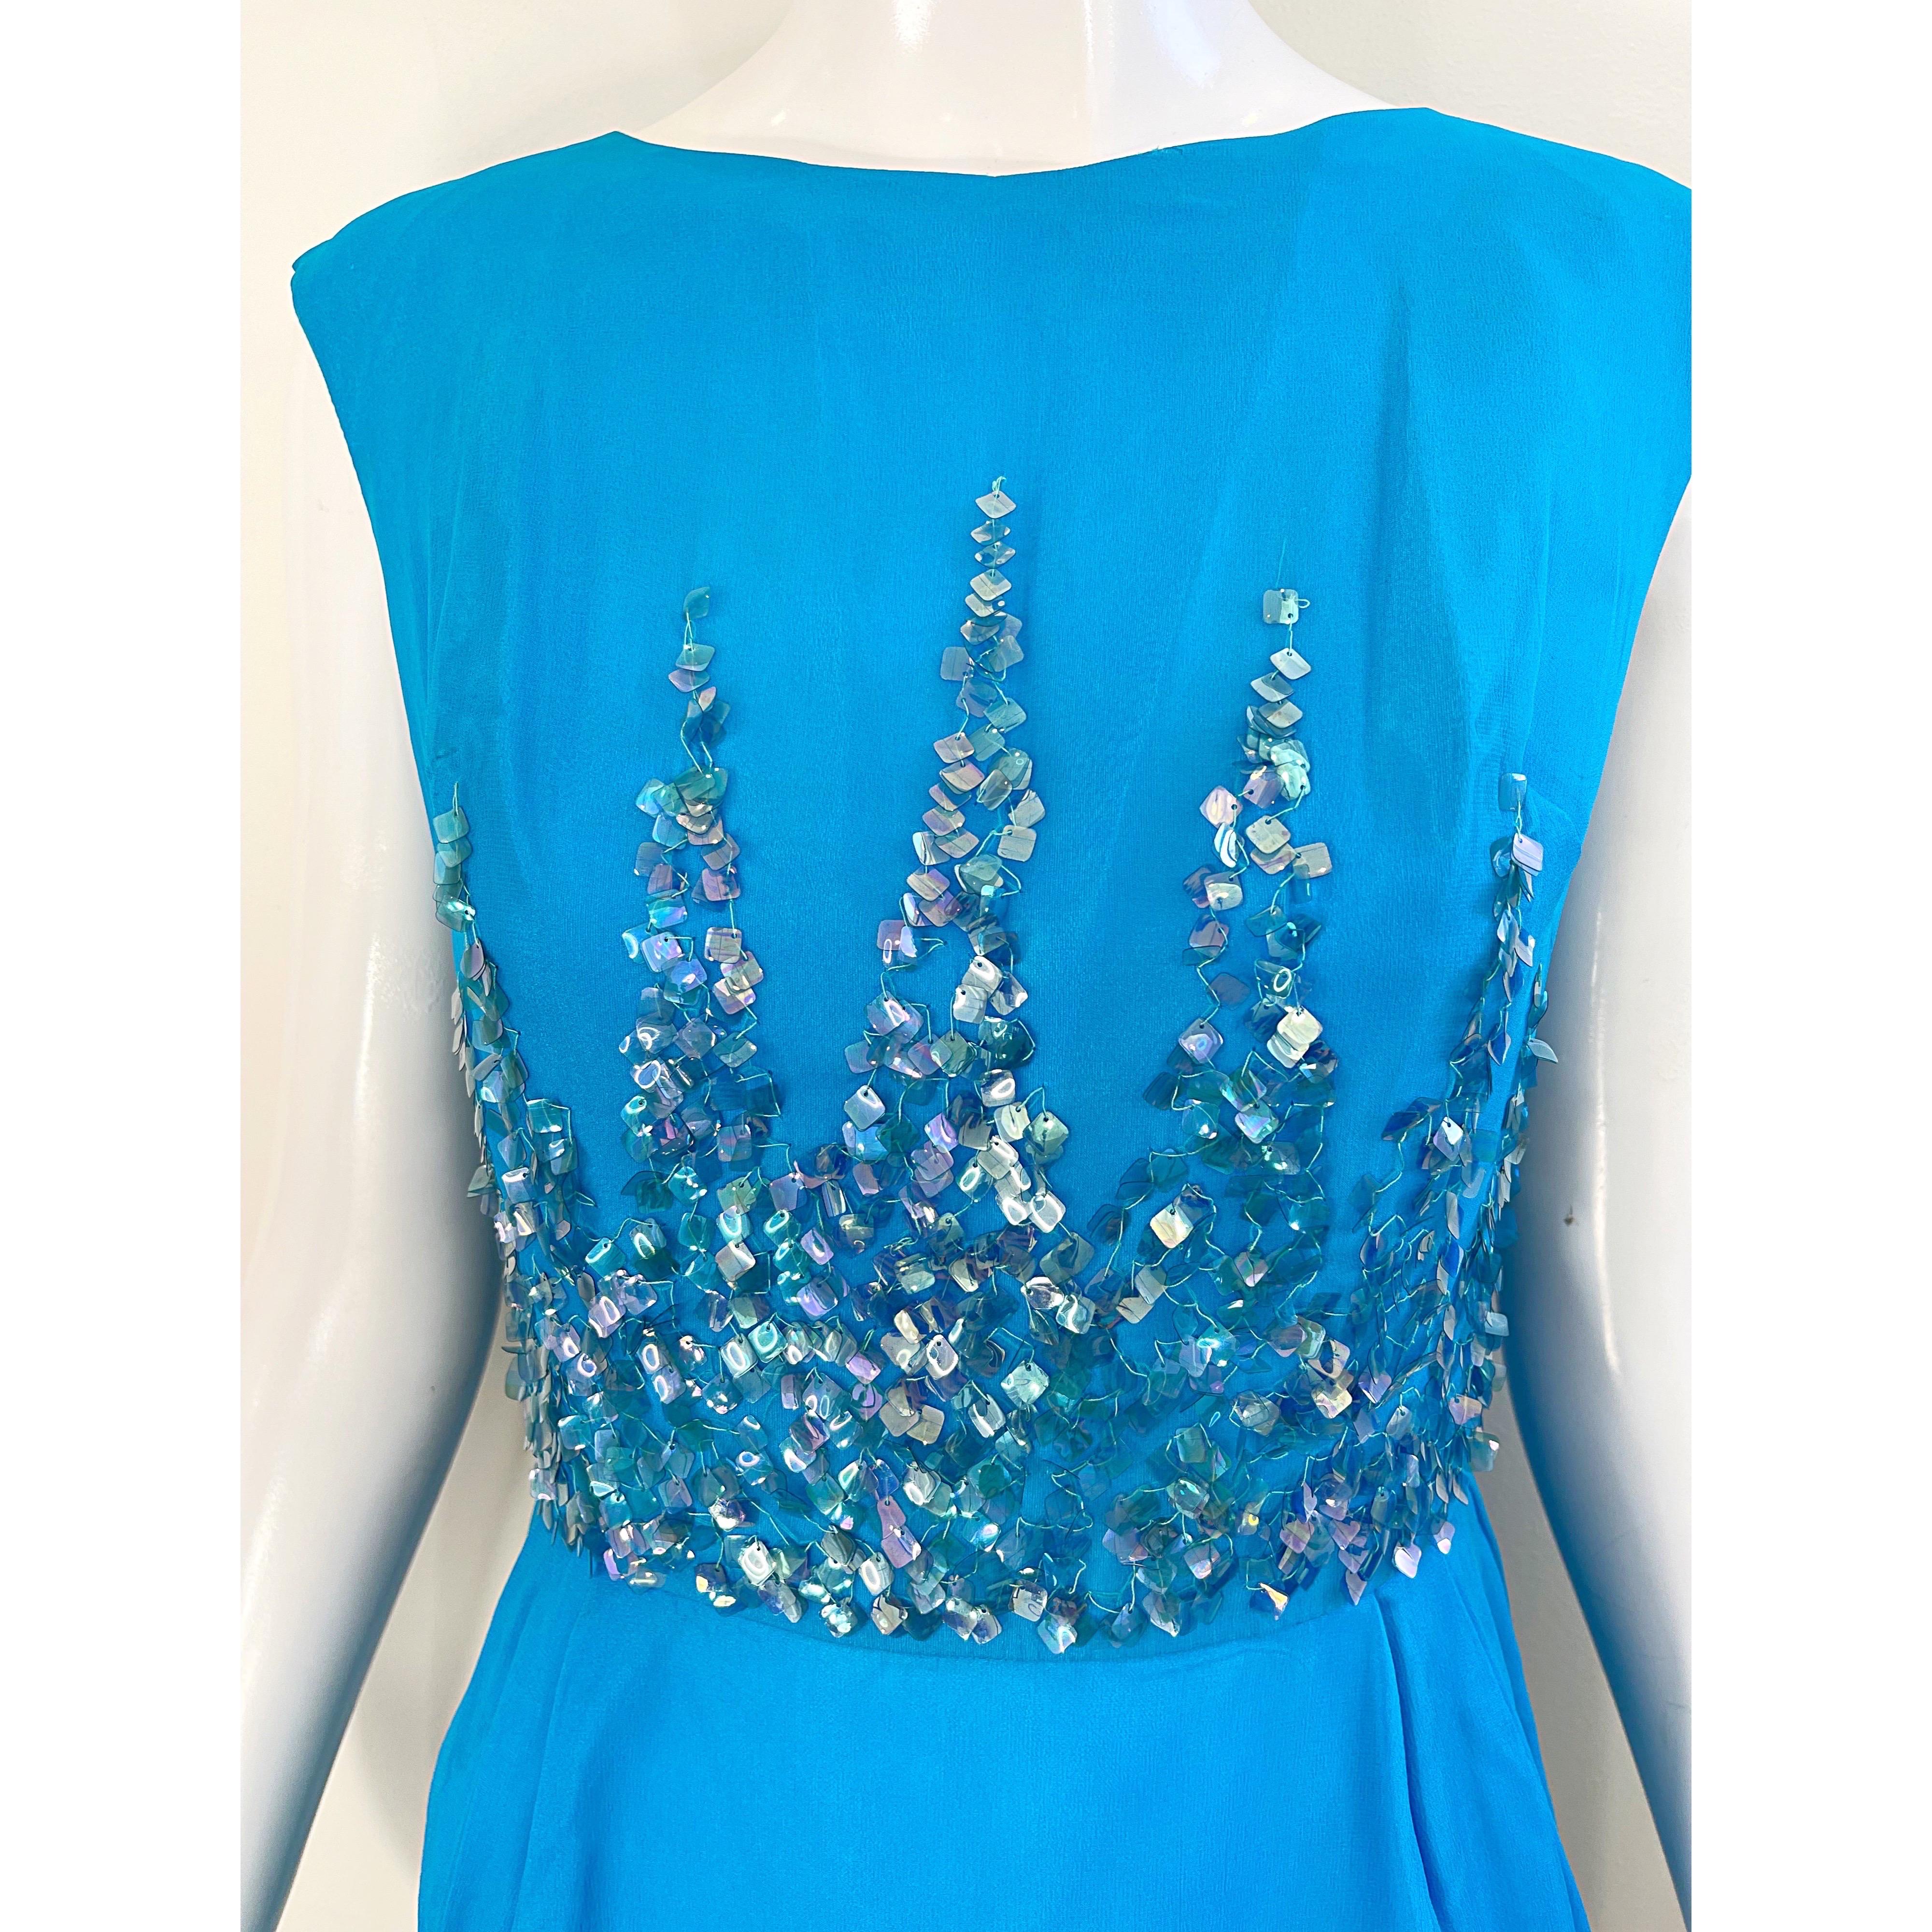 1960s Demi Couture Turquoise Blue Silk Chiffon Paillette Sequin Vintage Dress In Excellent Condition For Sale In San Diego, CA